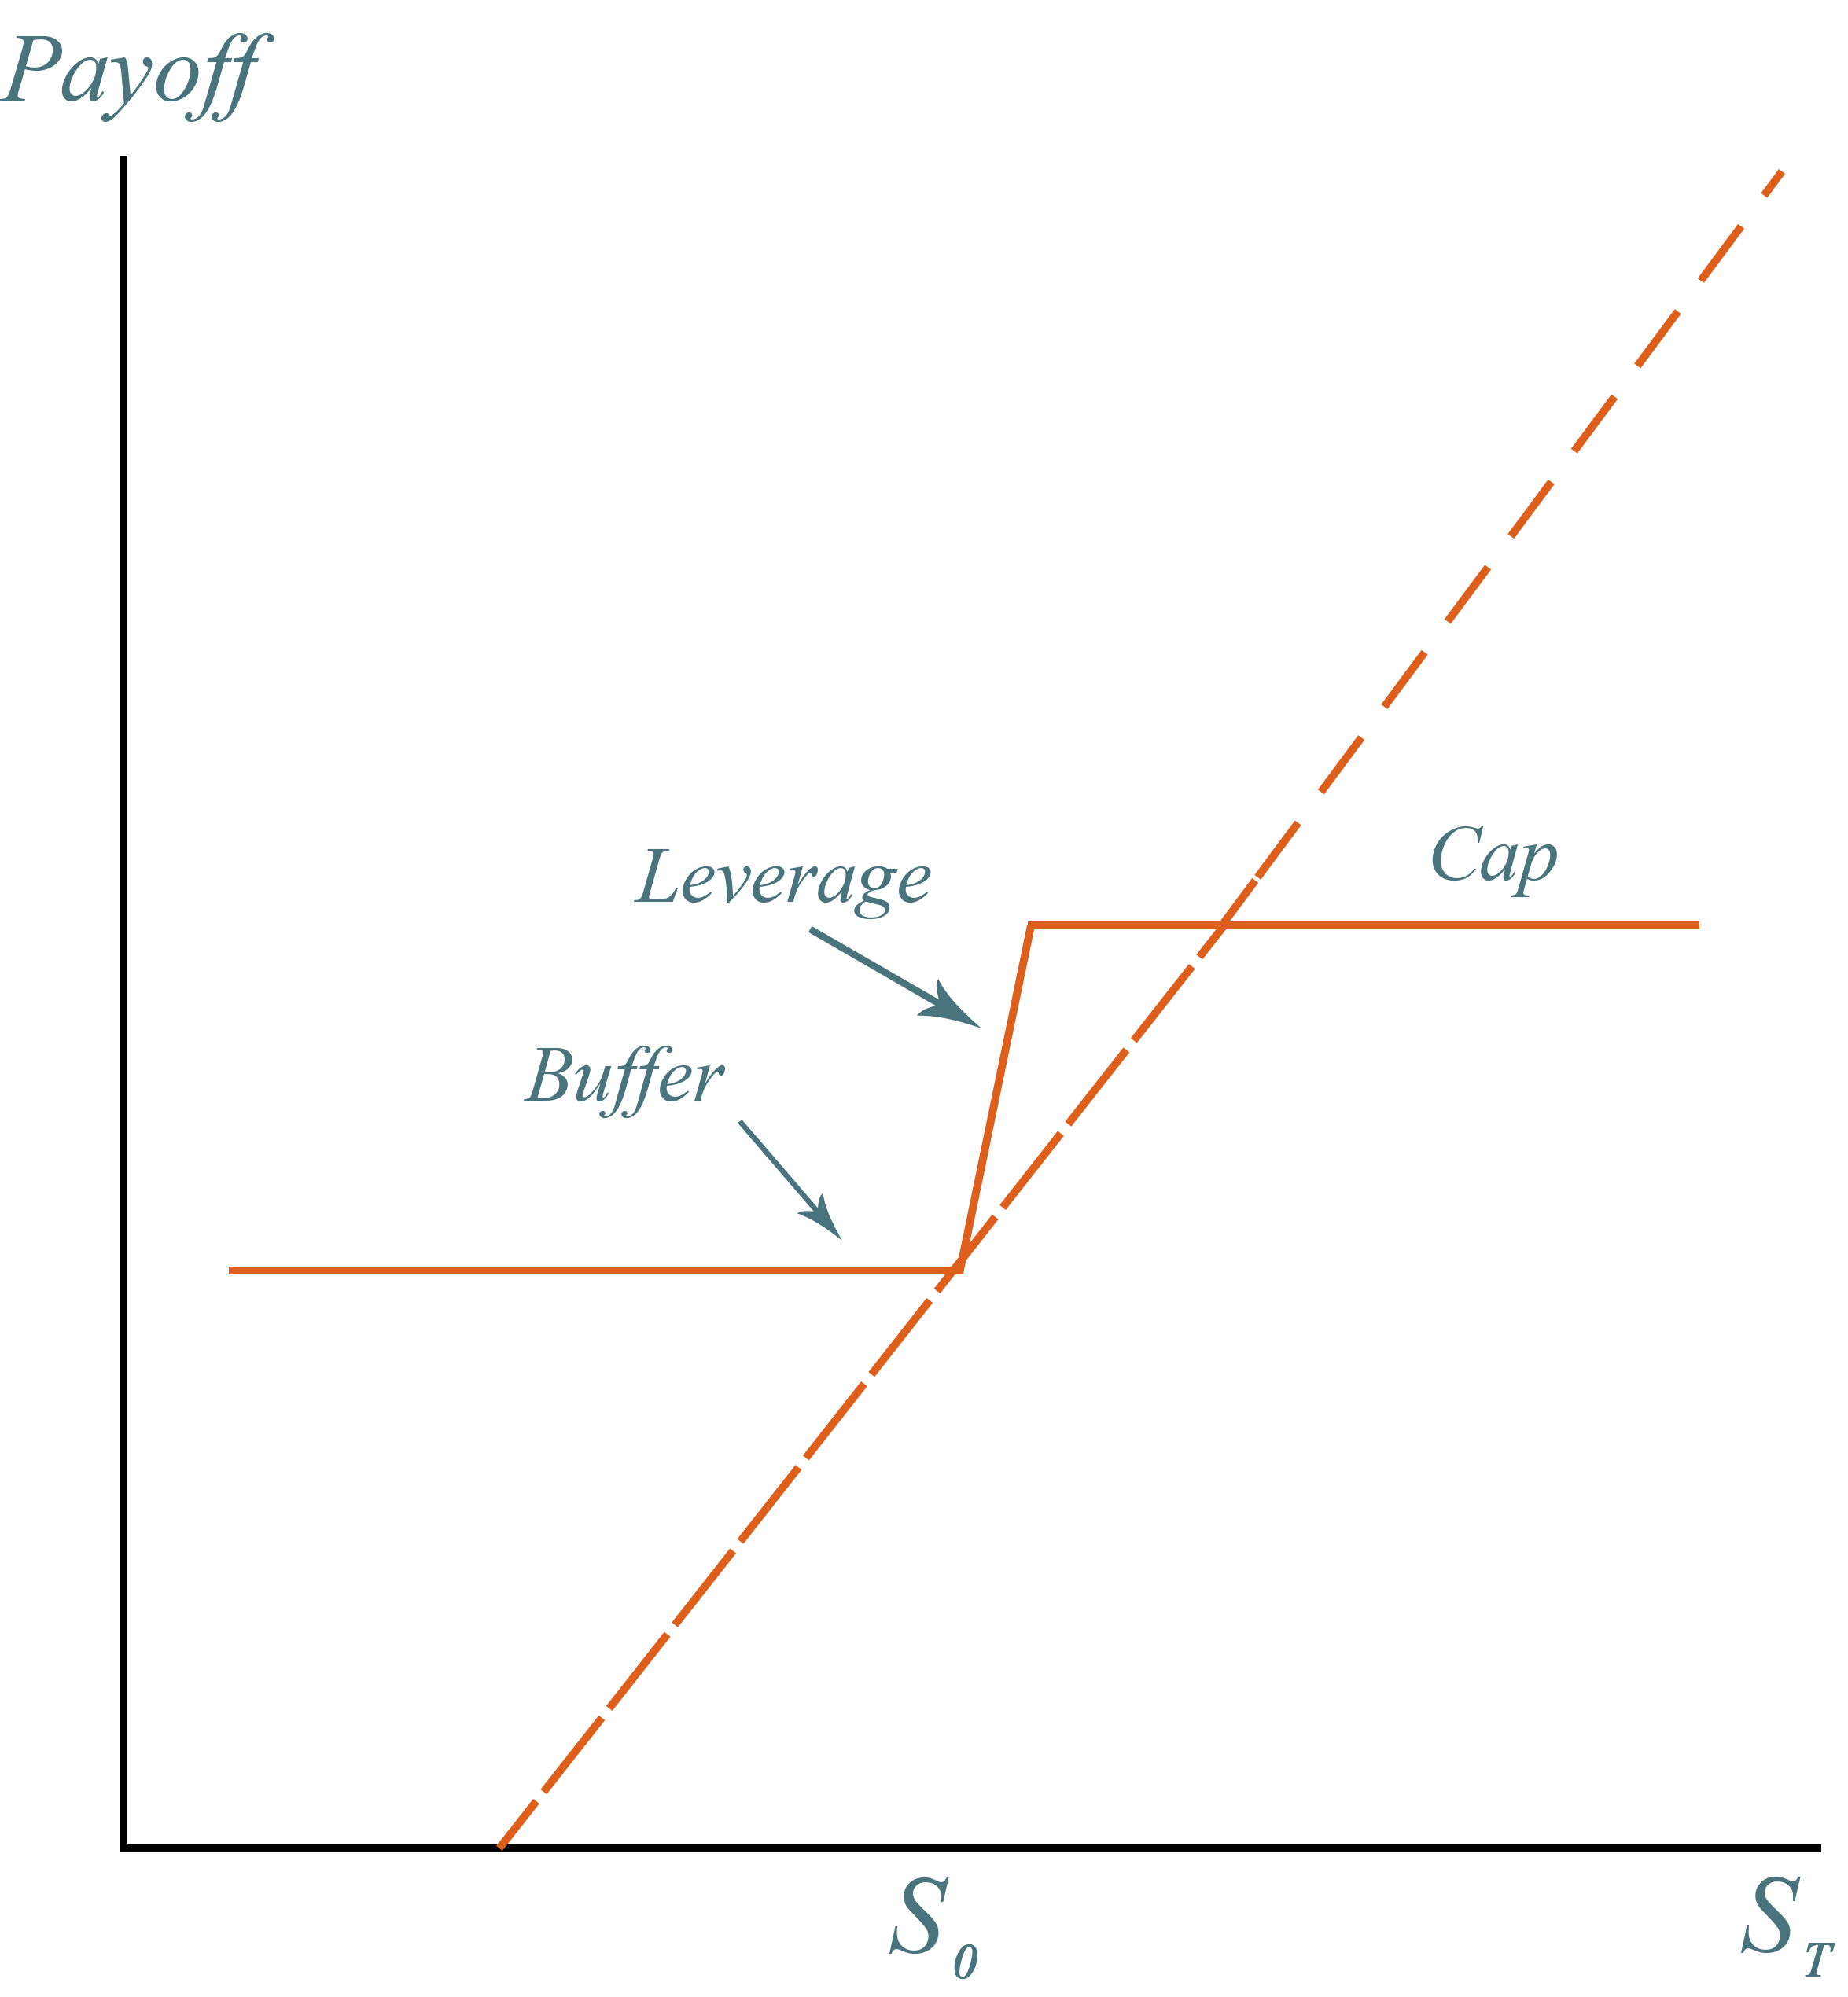 A graph demonstrating payoff over time for Principal Protected Notes